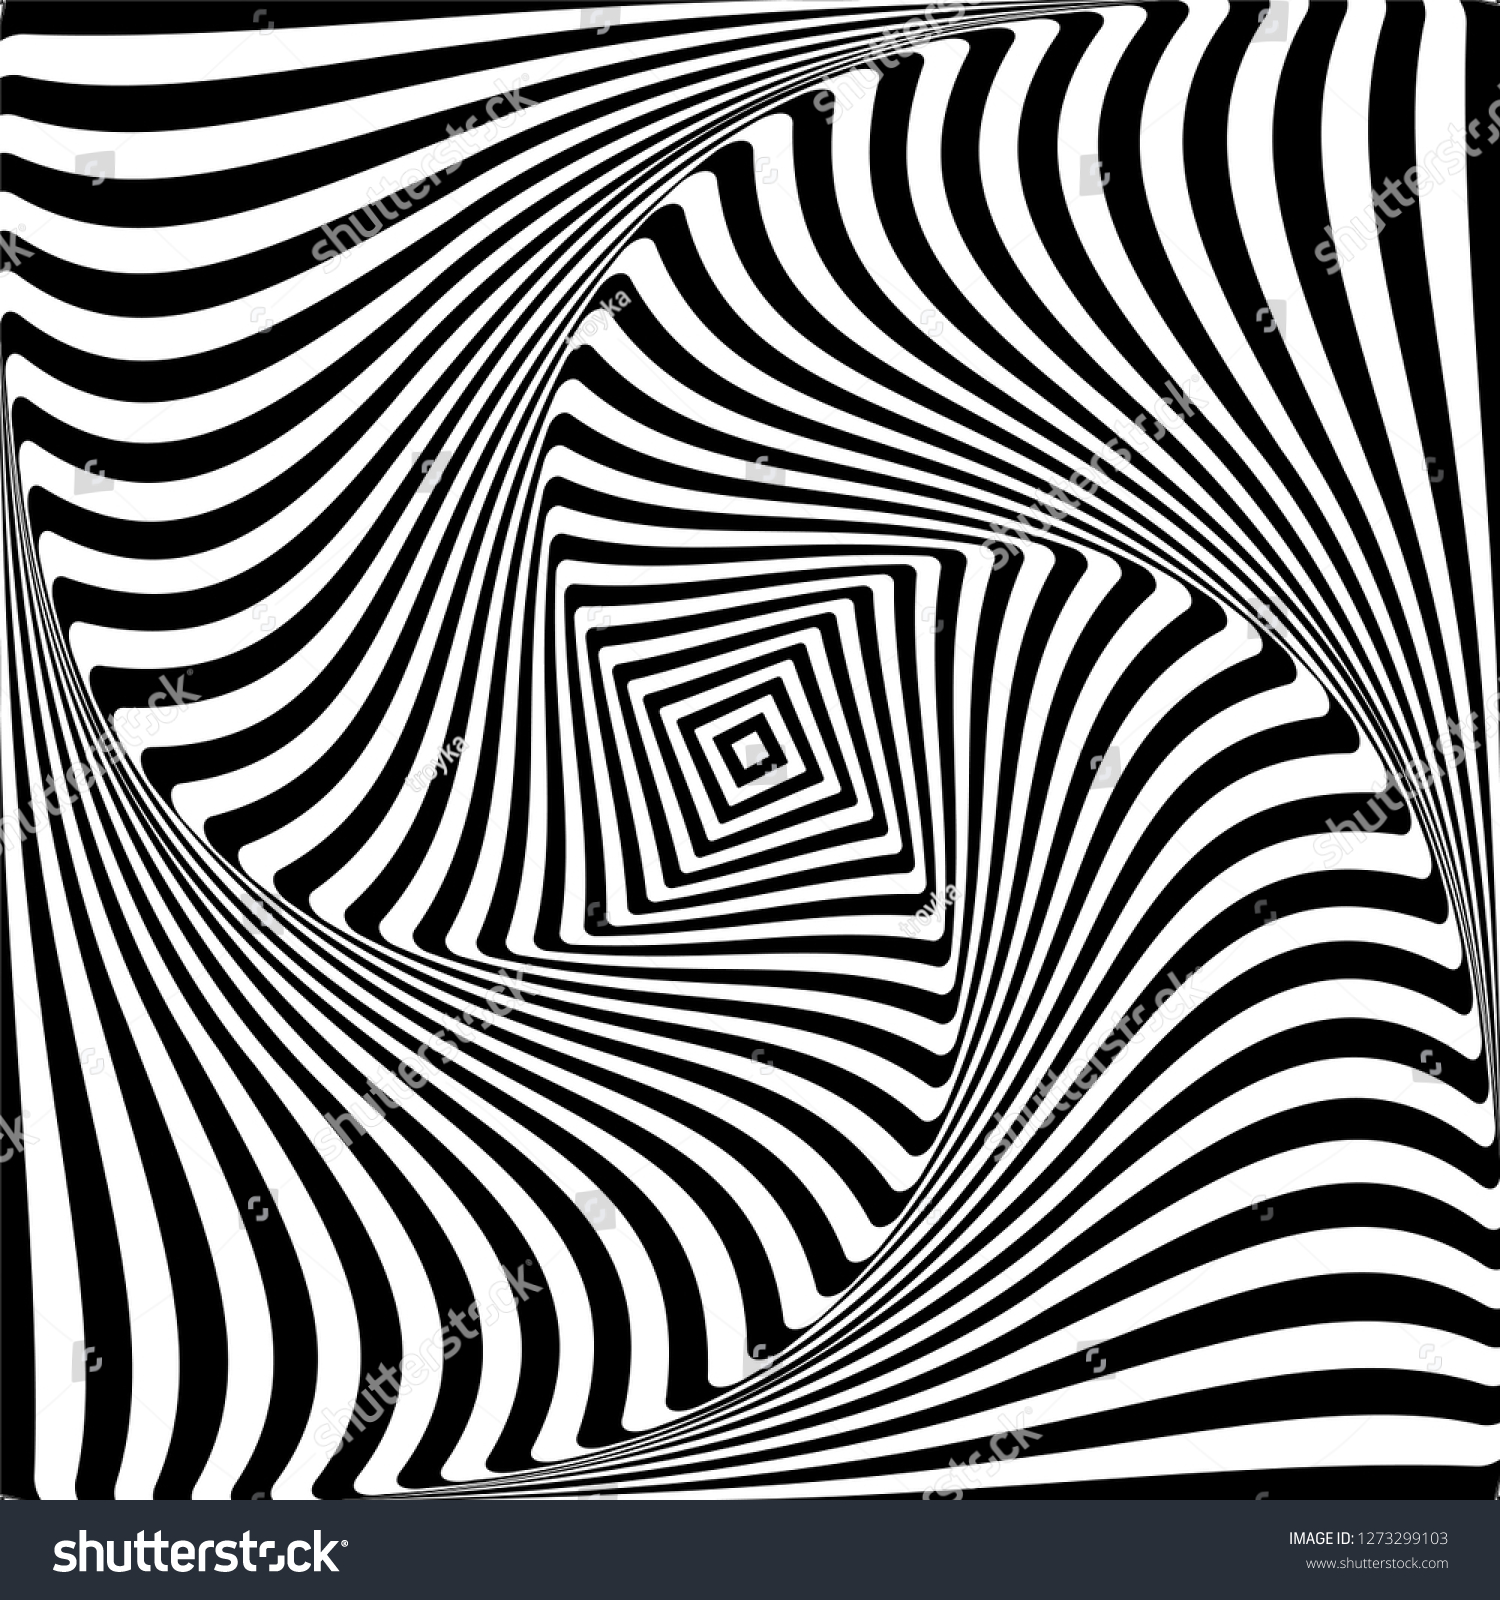 Black and white abstract op art graphic design